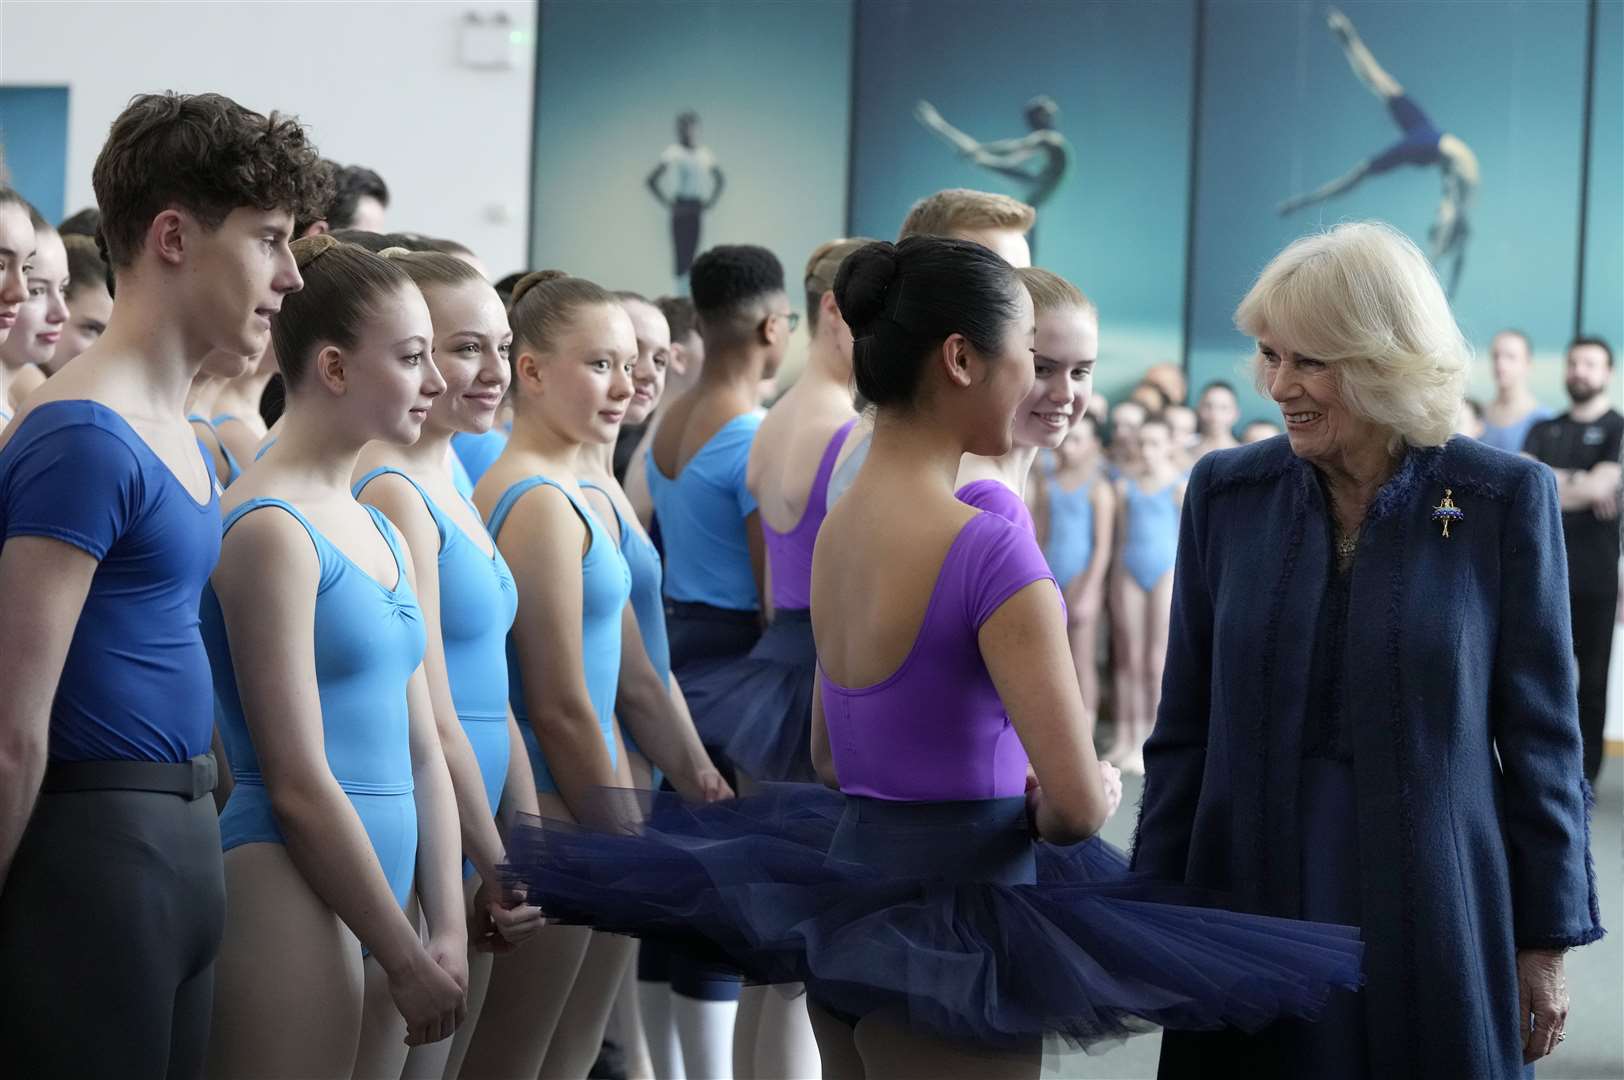 The Queen Consort met students during a visit to the Elmhurst Ballet School in Birmingham, of which she is patron, to celebrate its centenary (Frank Augstein/PA)